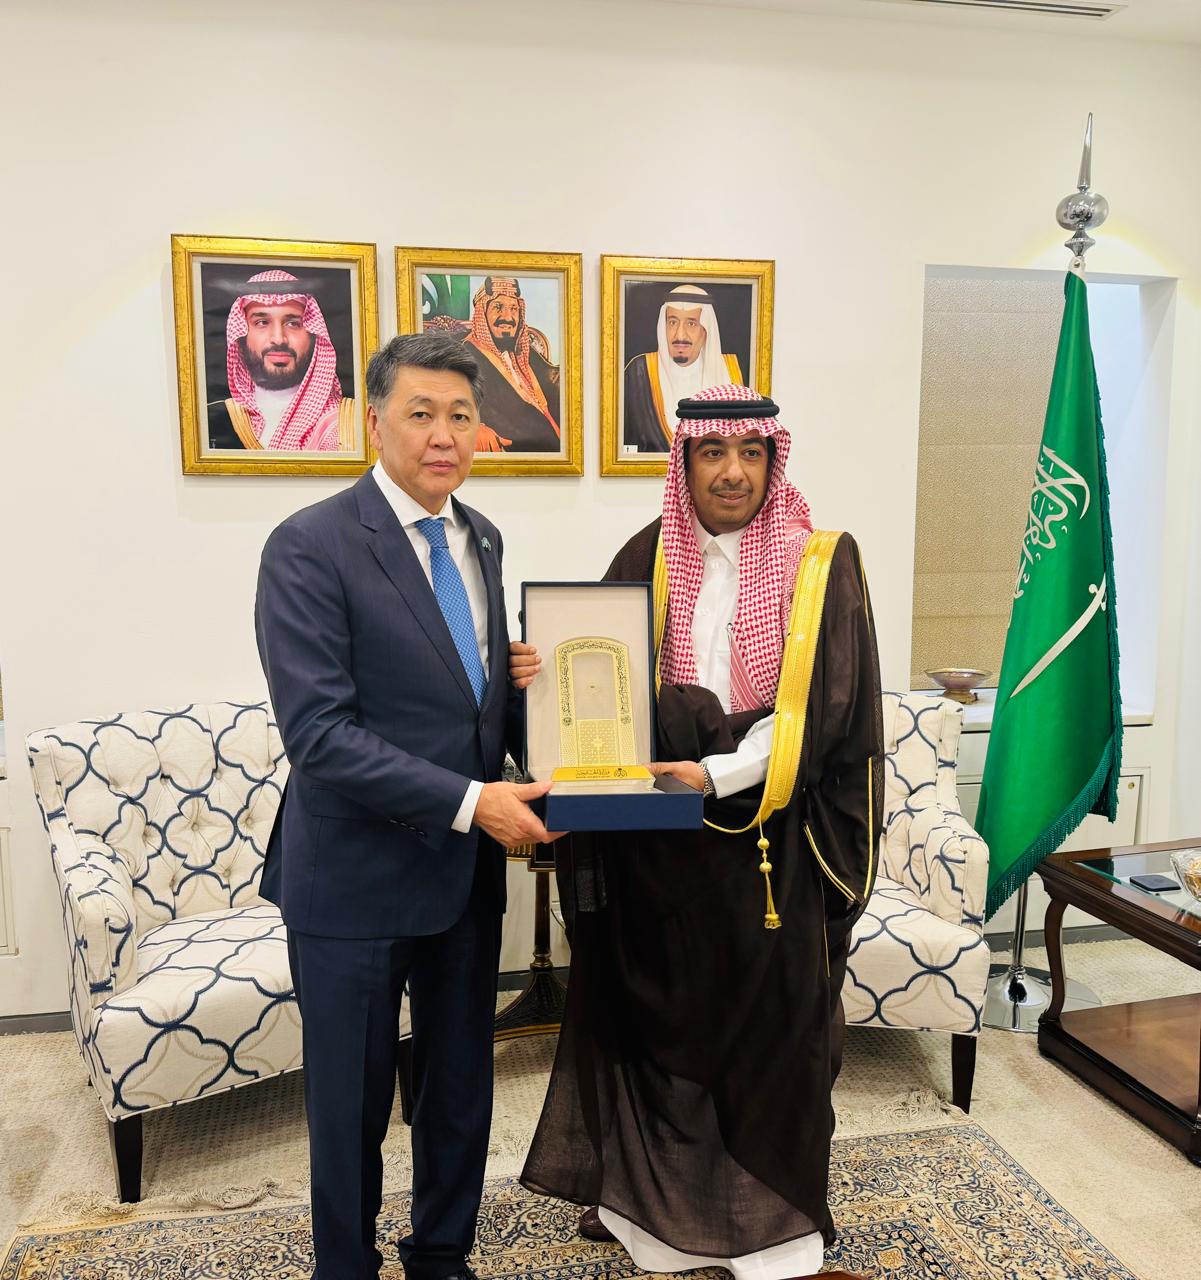 Ambassador B.Aryn, on the occasion of the completion of the diplomatic mission, met with the leadership of the Ministry of Foreign Affairs of Saudi Arabia